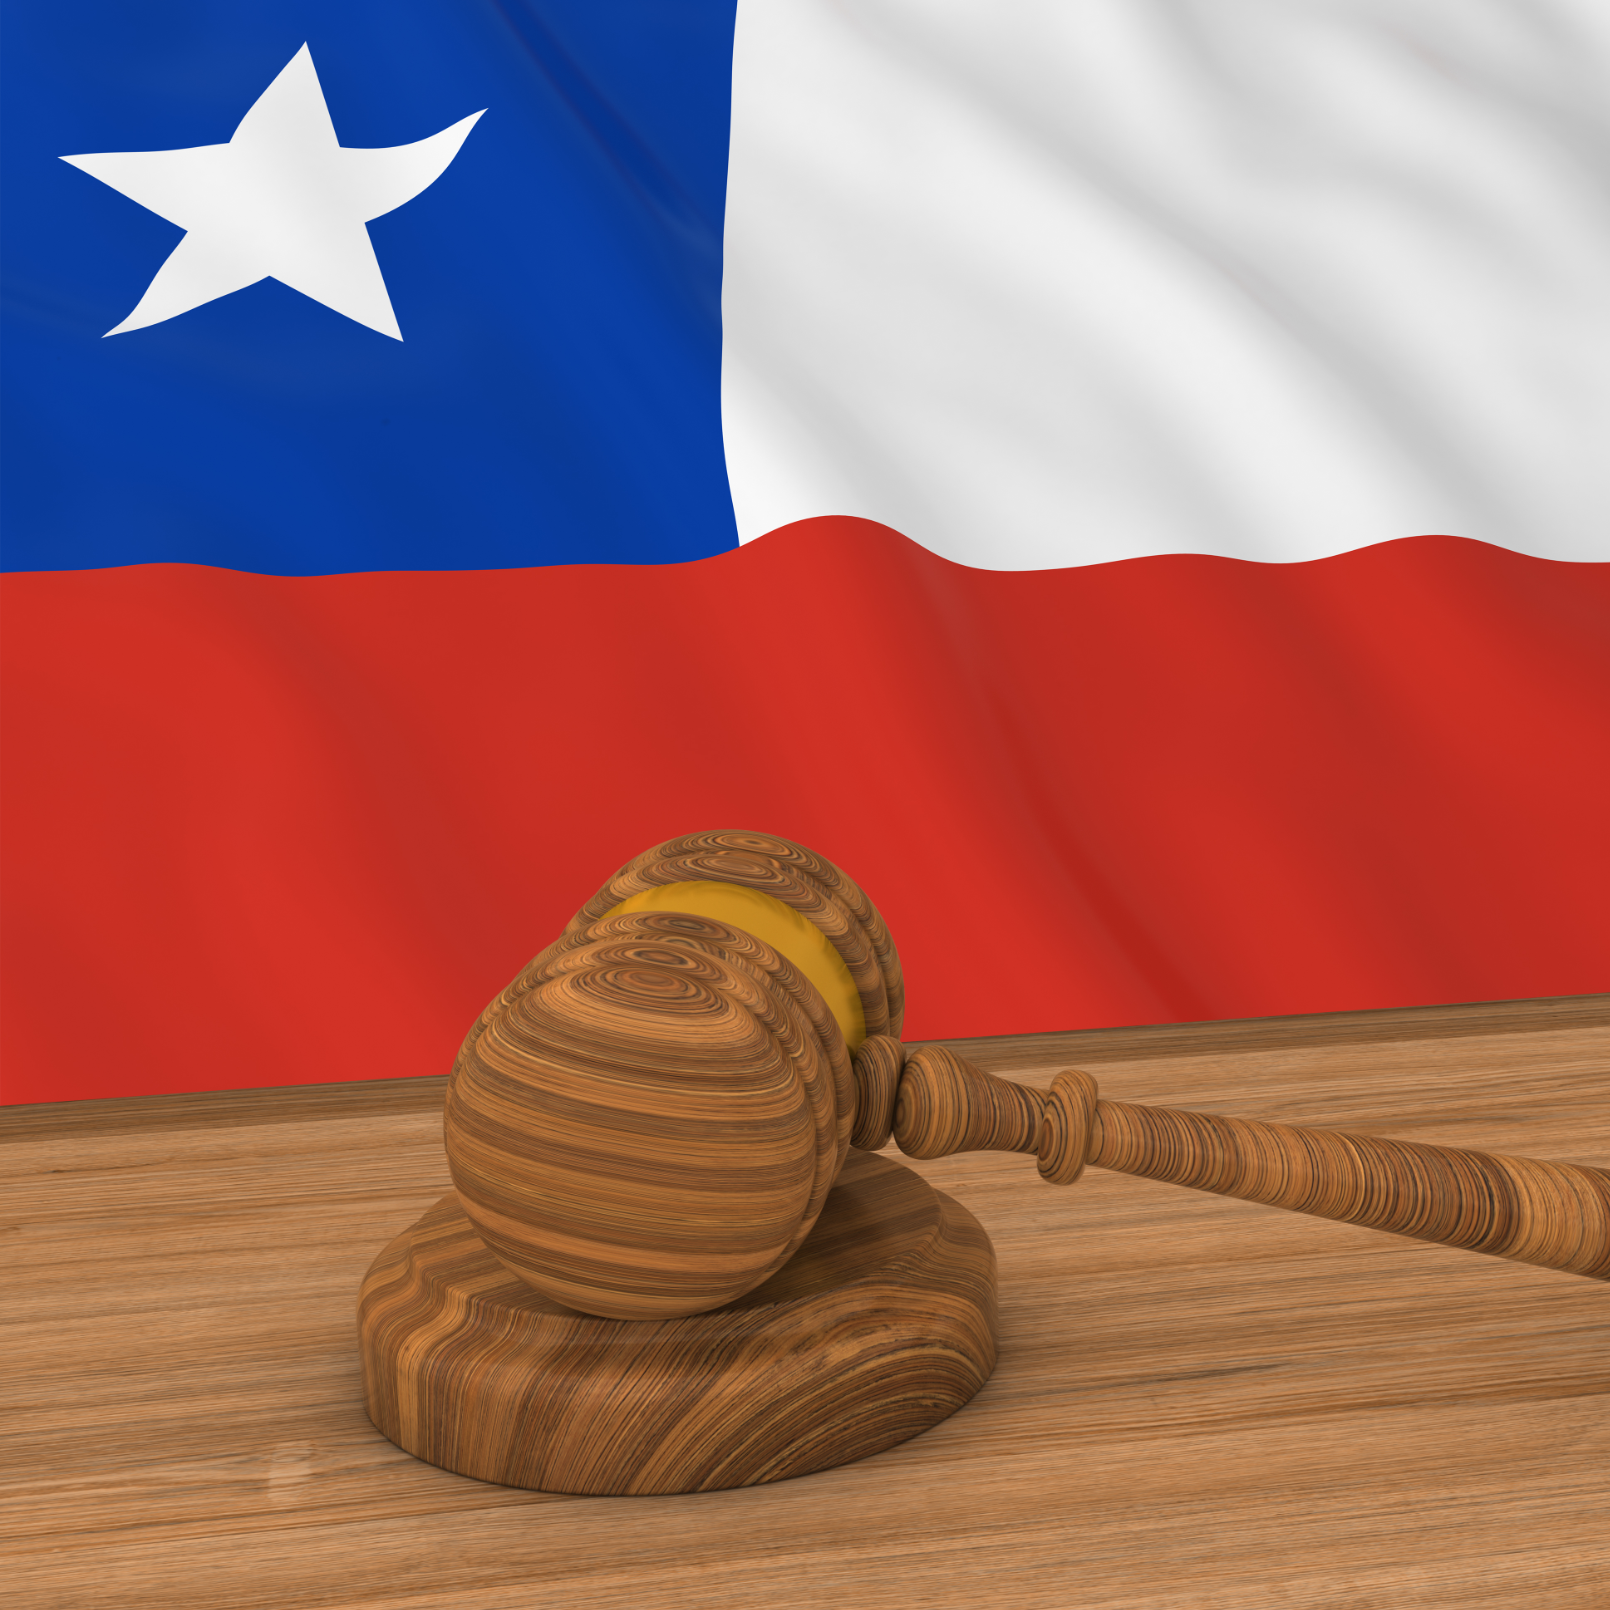 Court Orders Chilean Banks to Re-Open Crypto Exchange Accounts